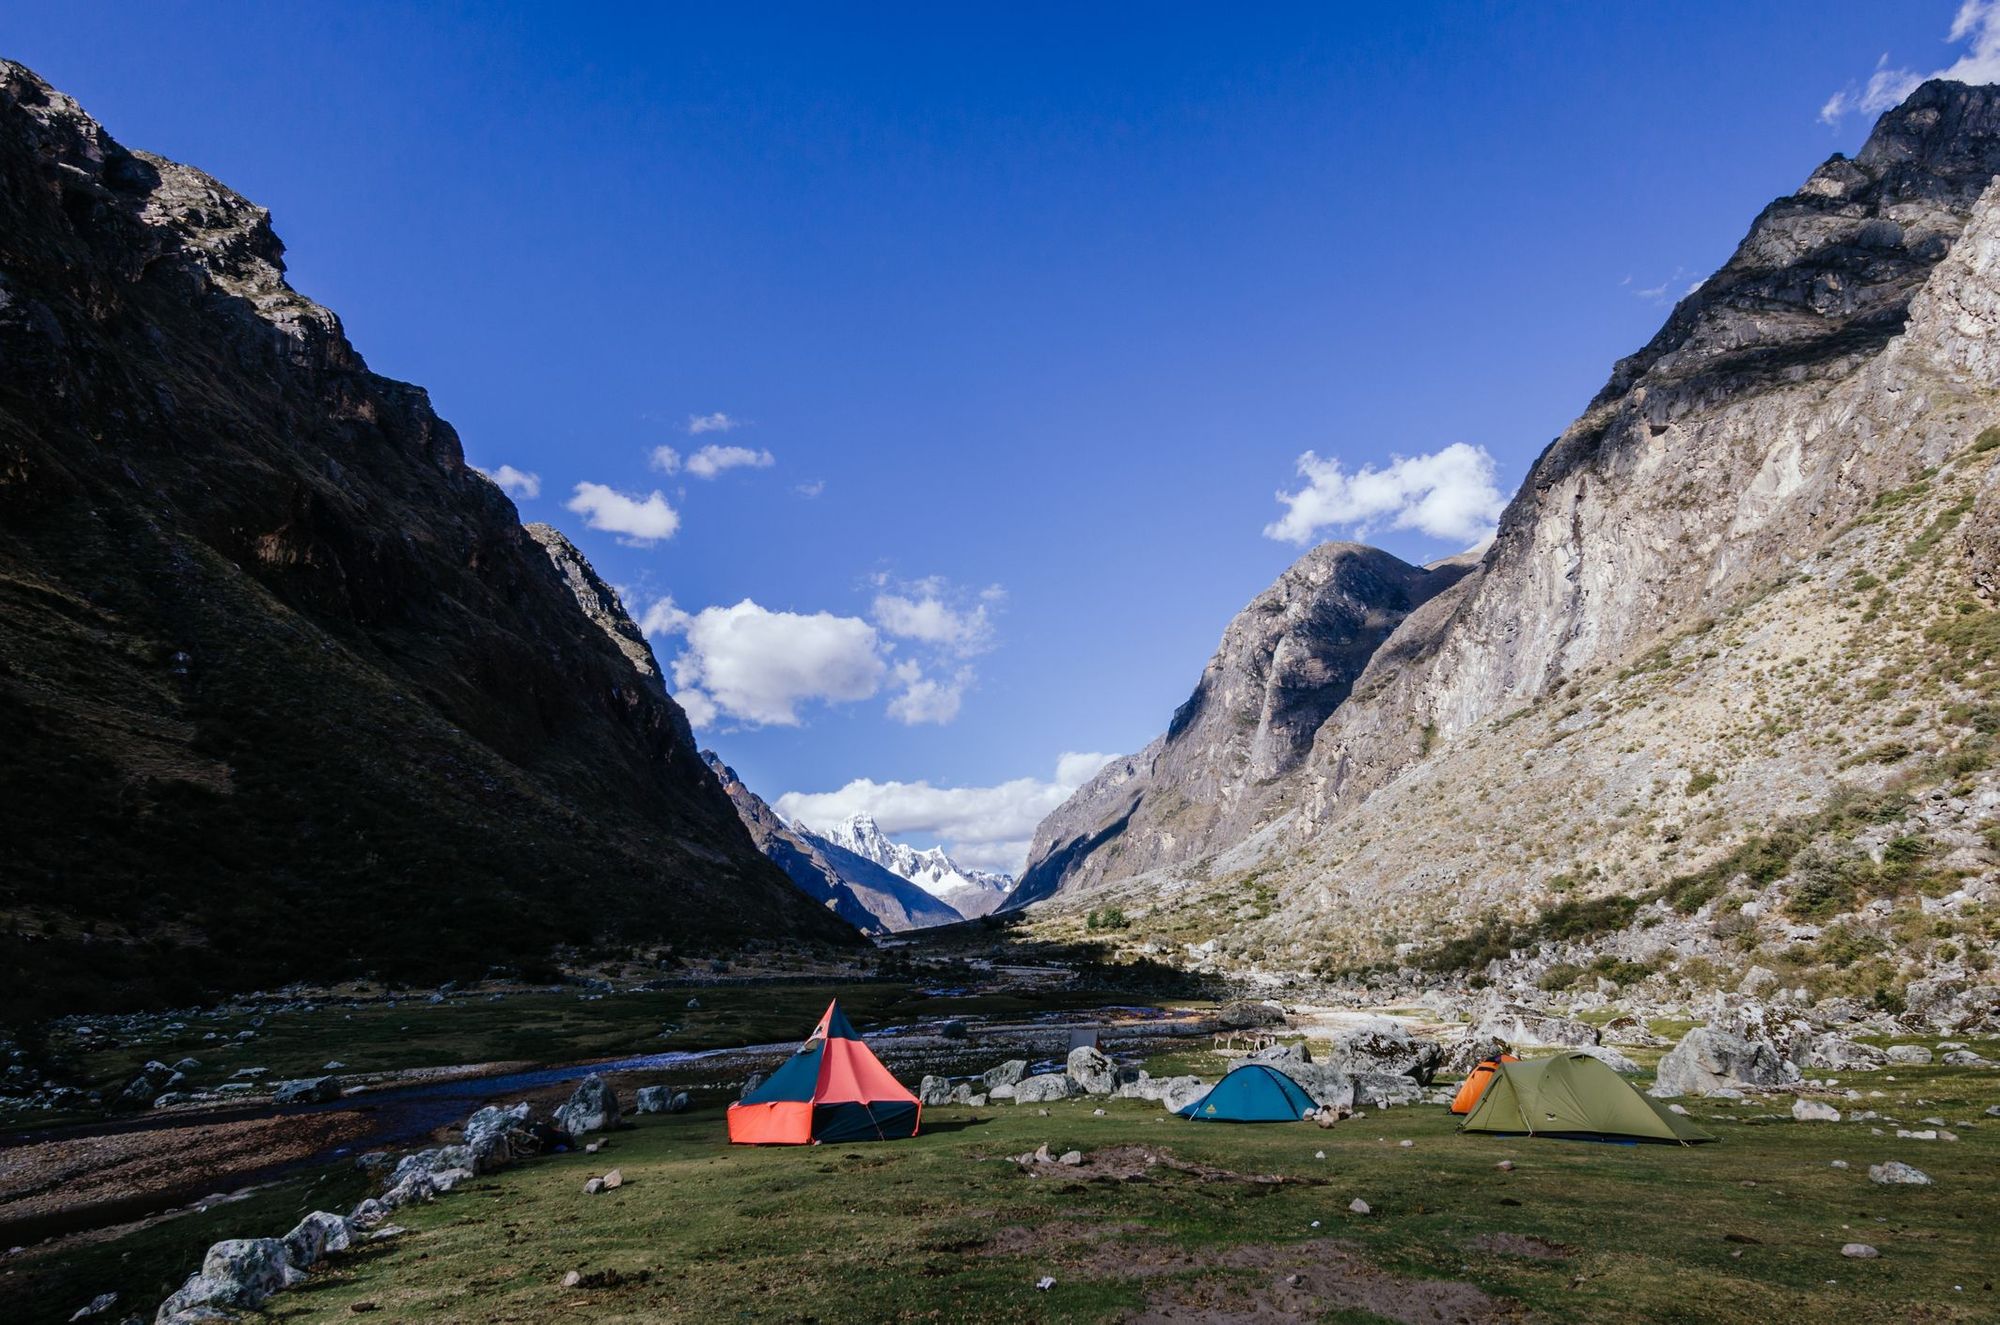 A campsite in Peru's Cordillera Blanca, surrounded by mountains.